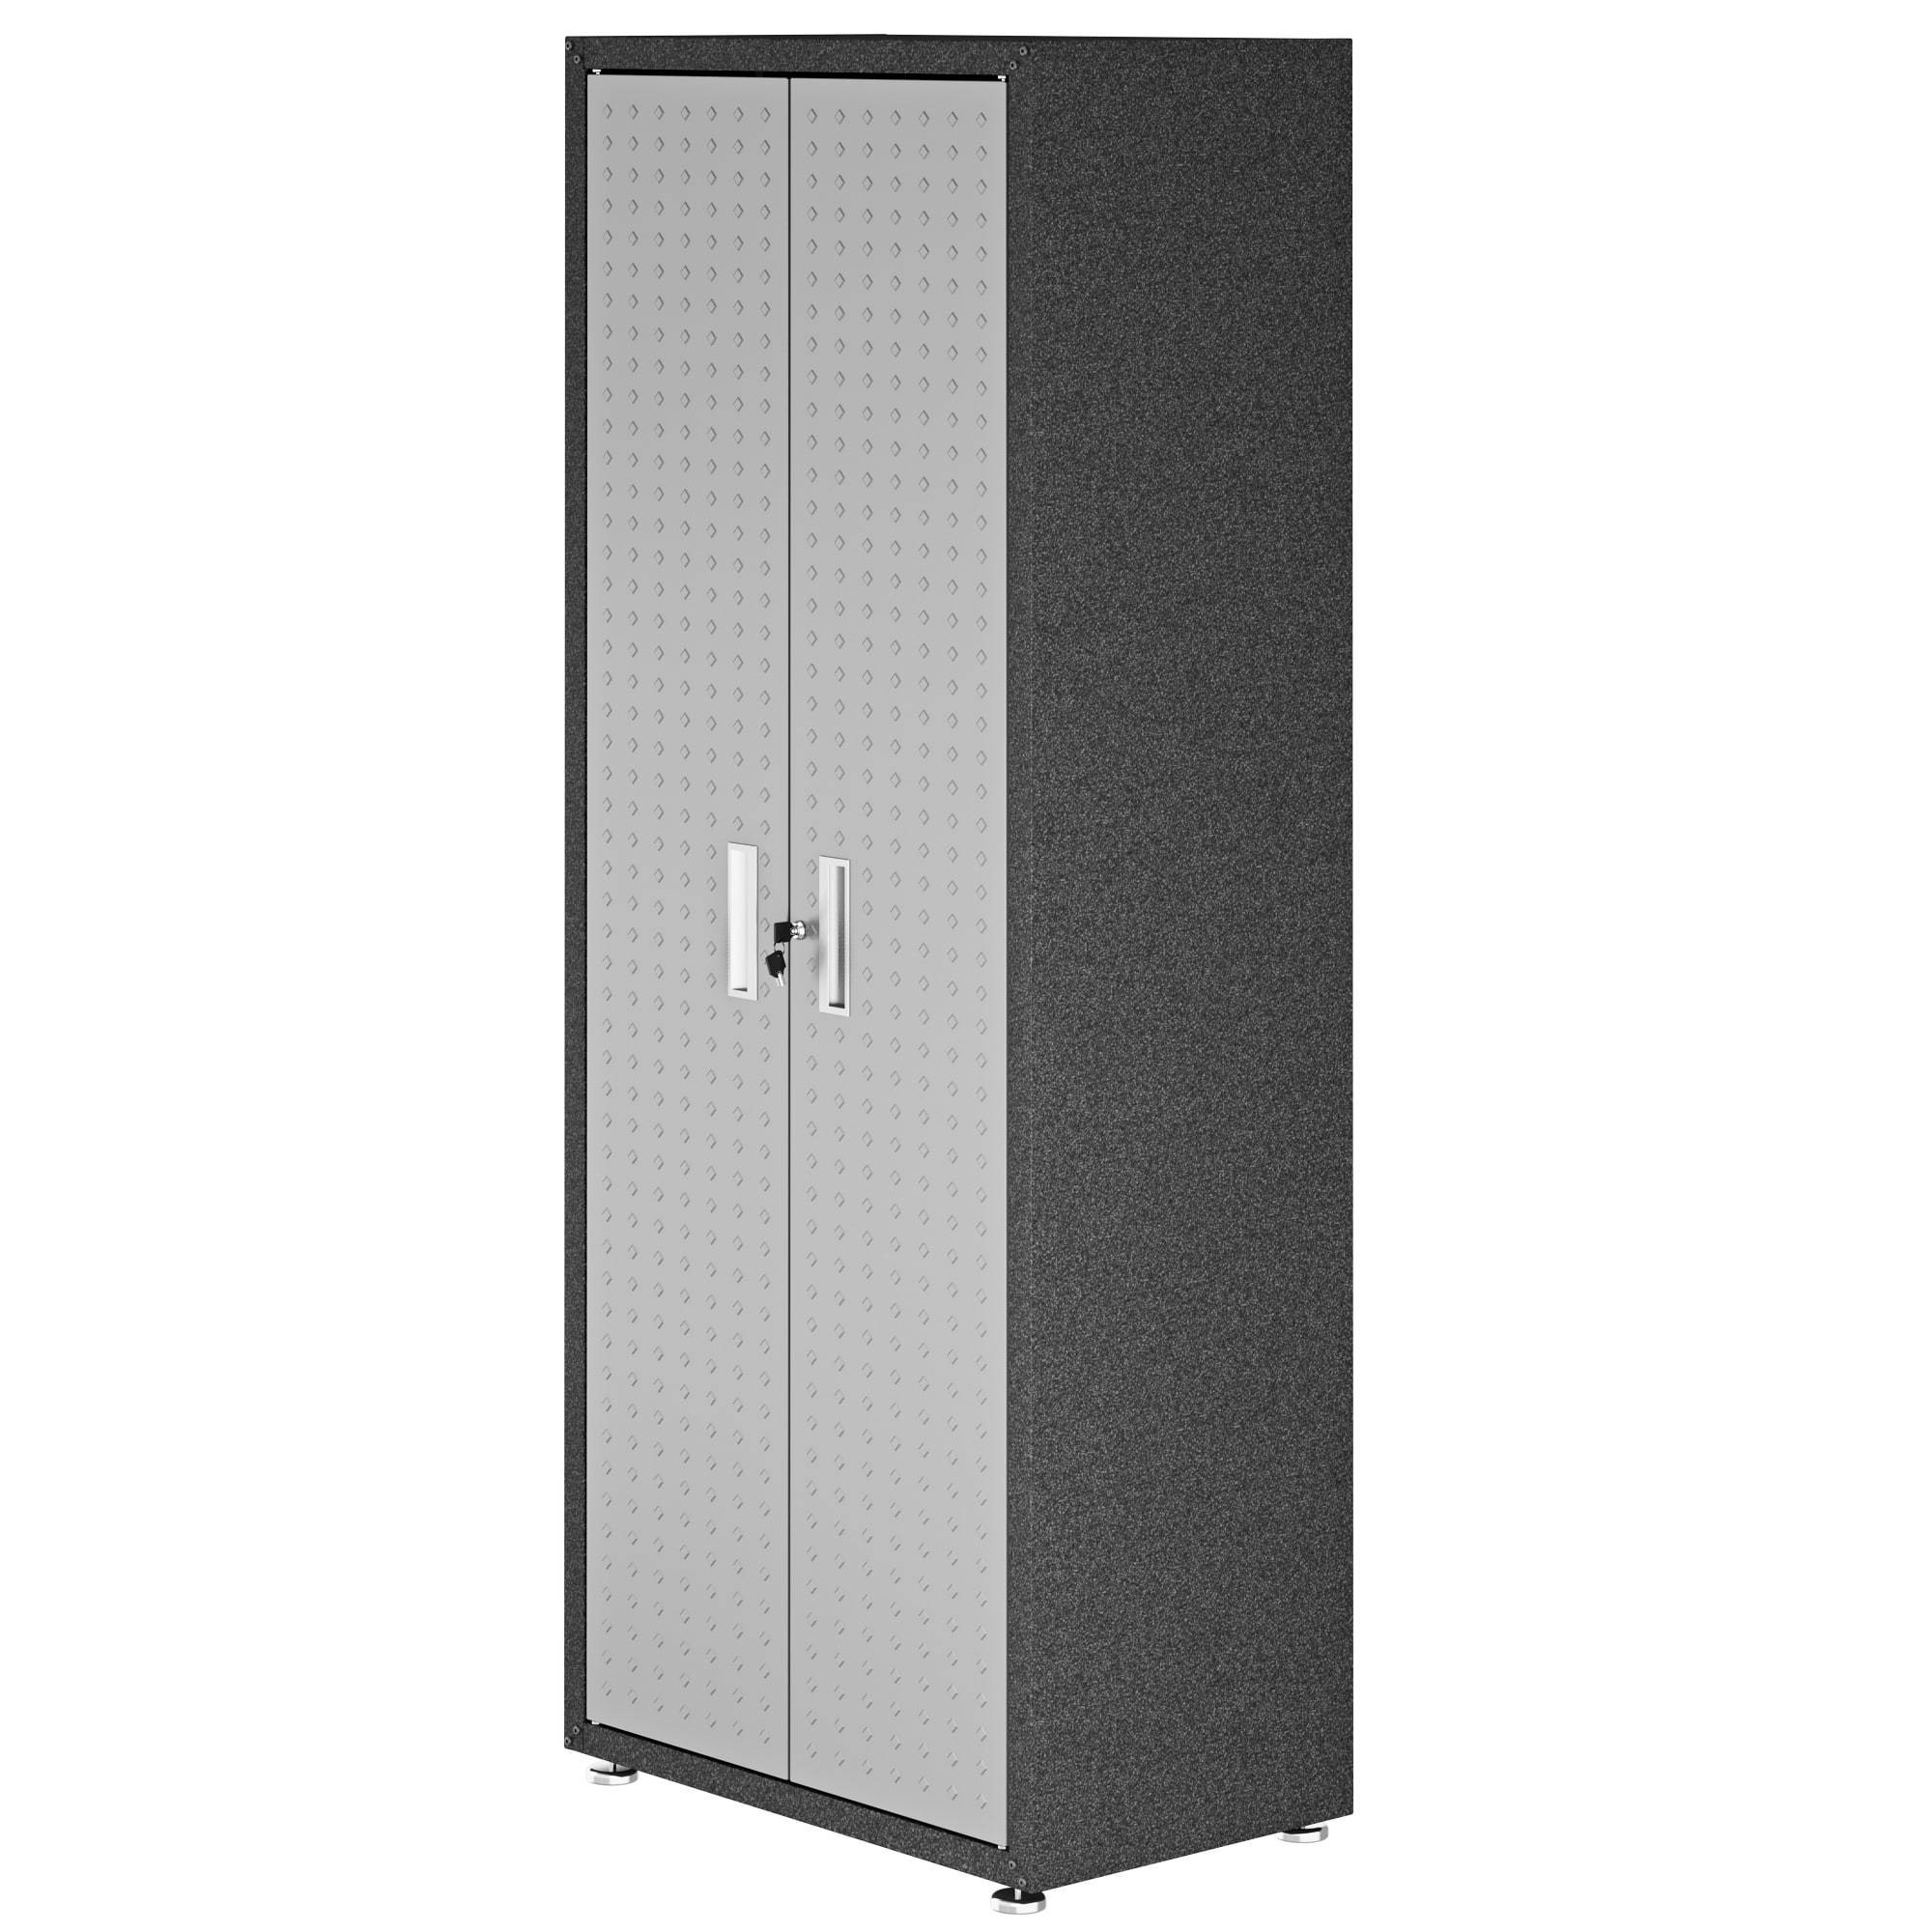 Manhattan Comfort, Fortress Tall Garage Cabinet in Grey, Height 74.8 in, Width 30.3 in, Color Gray, Model 1GMCF